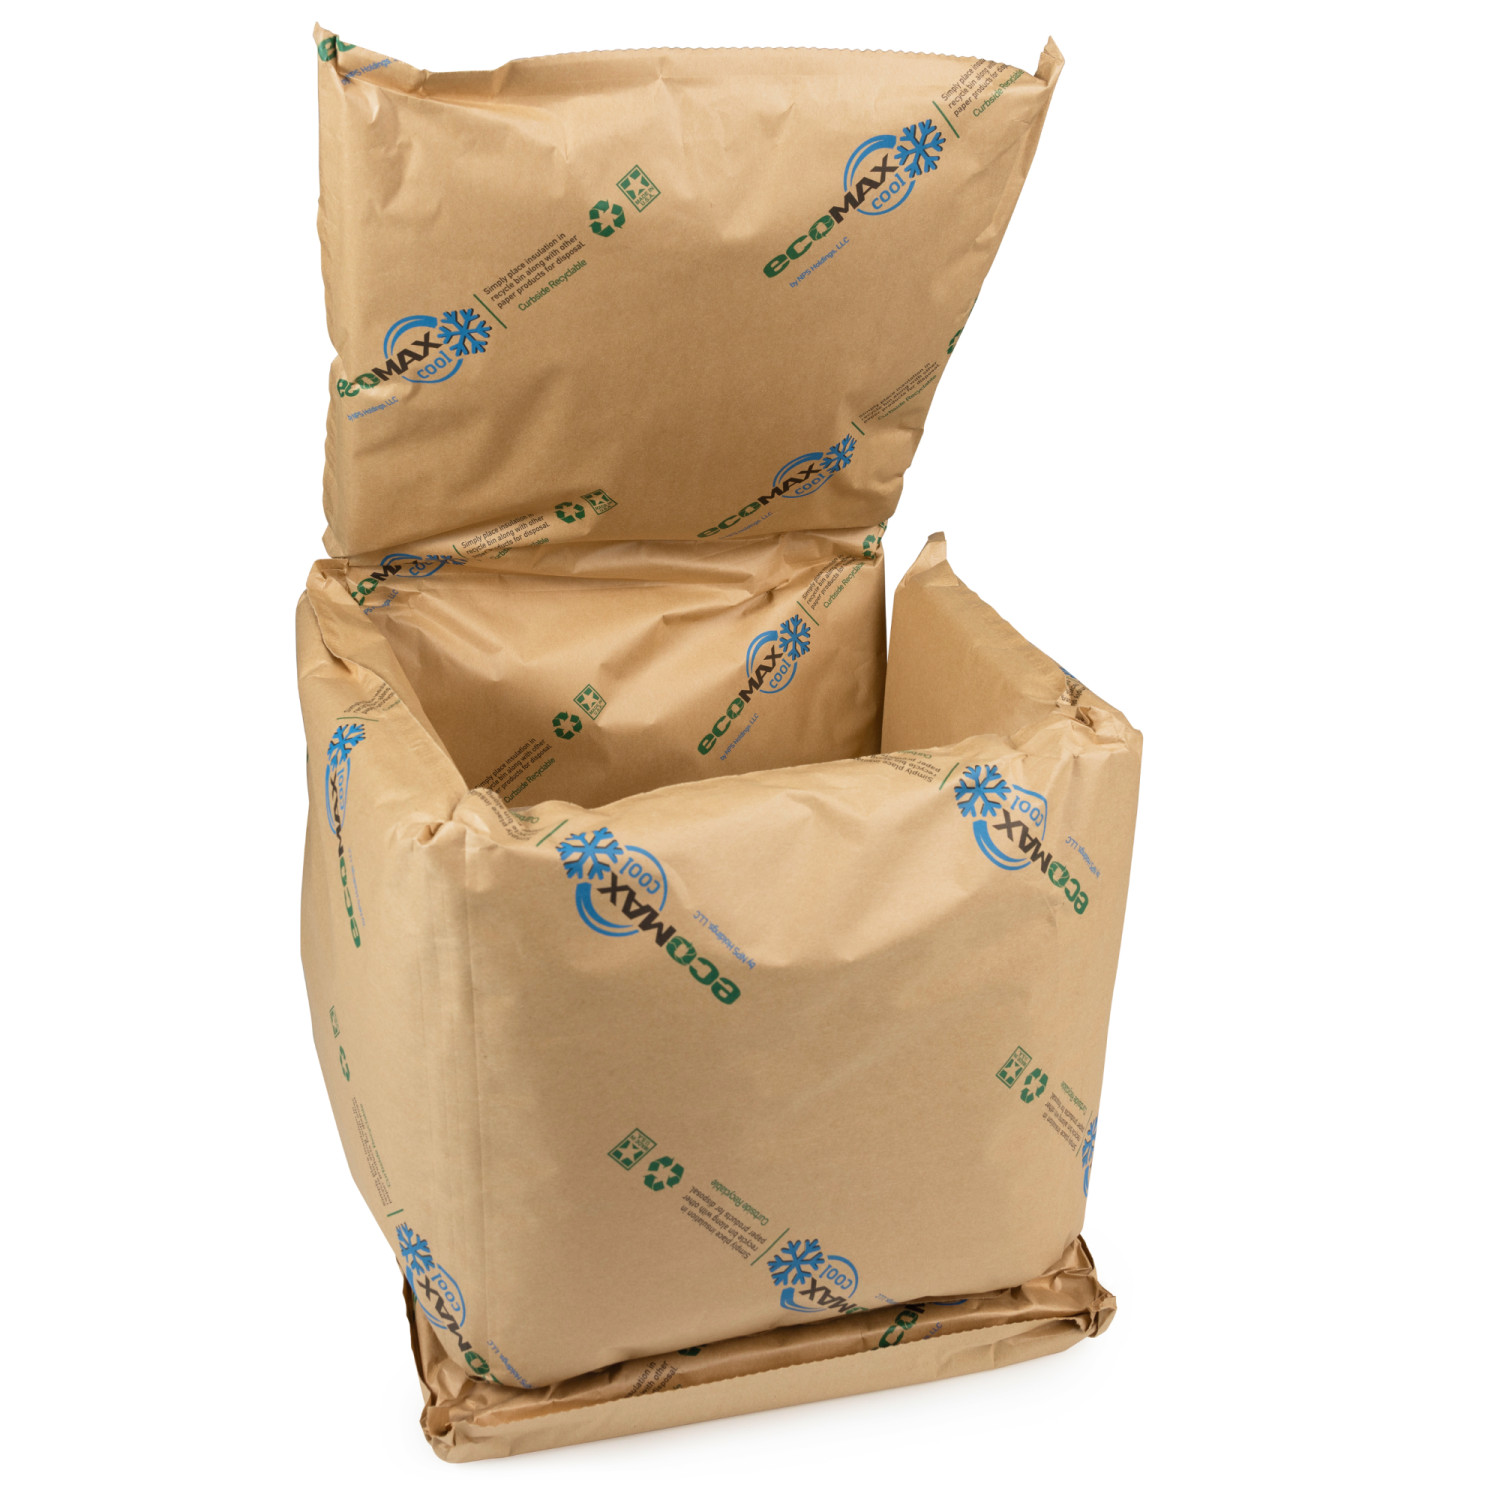 Dropship Foil Insulated Box Liners 12 X 10 X 9; Pack Of 5